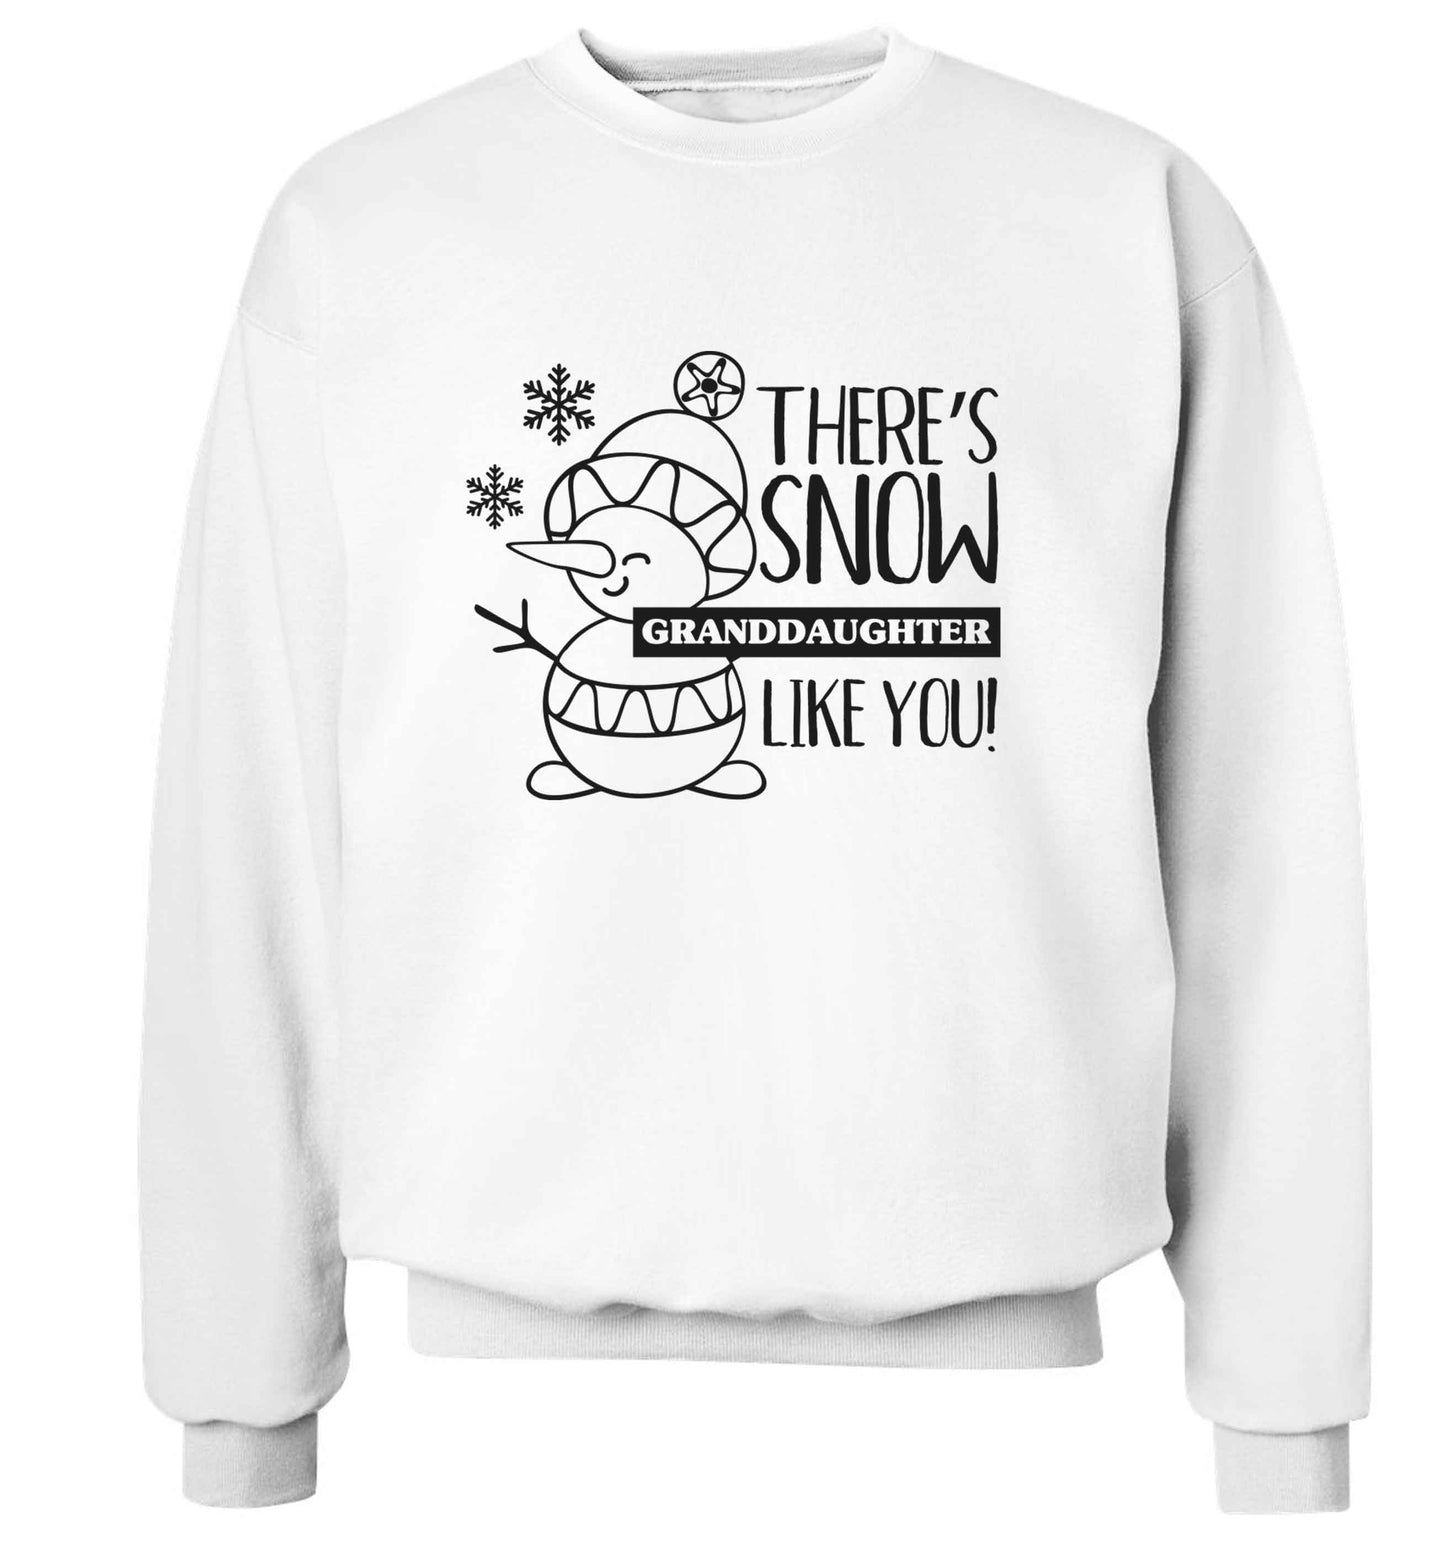 There's snow granddaughter like you adult's unisex white sweater 2XL